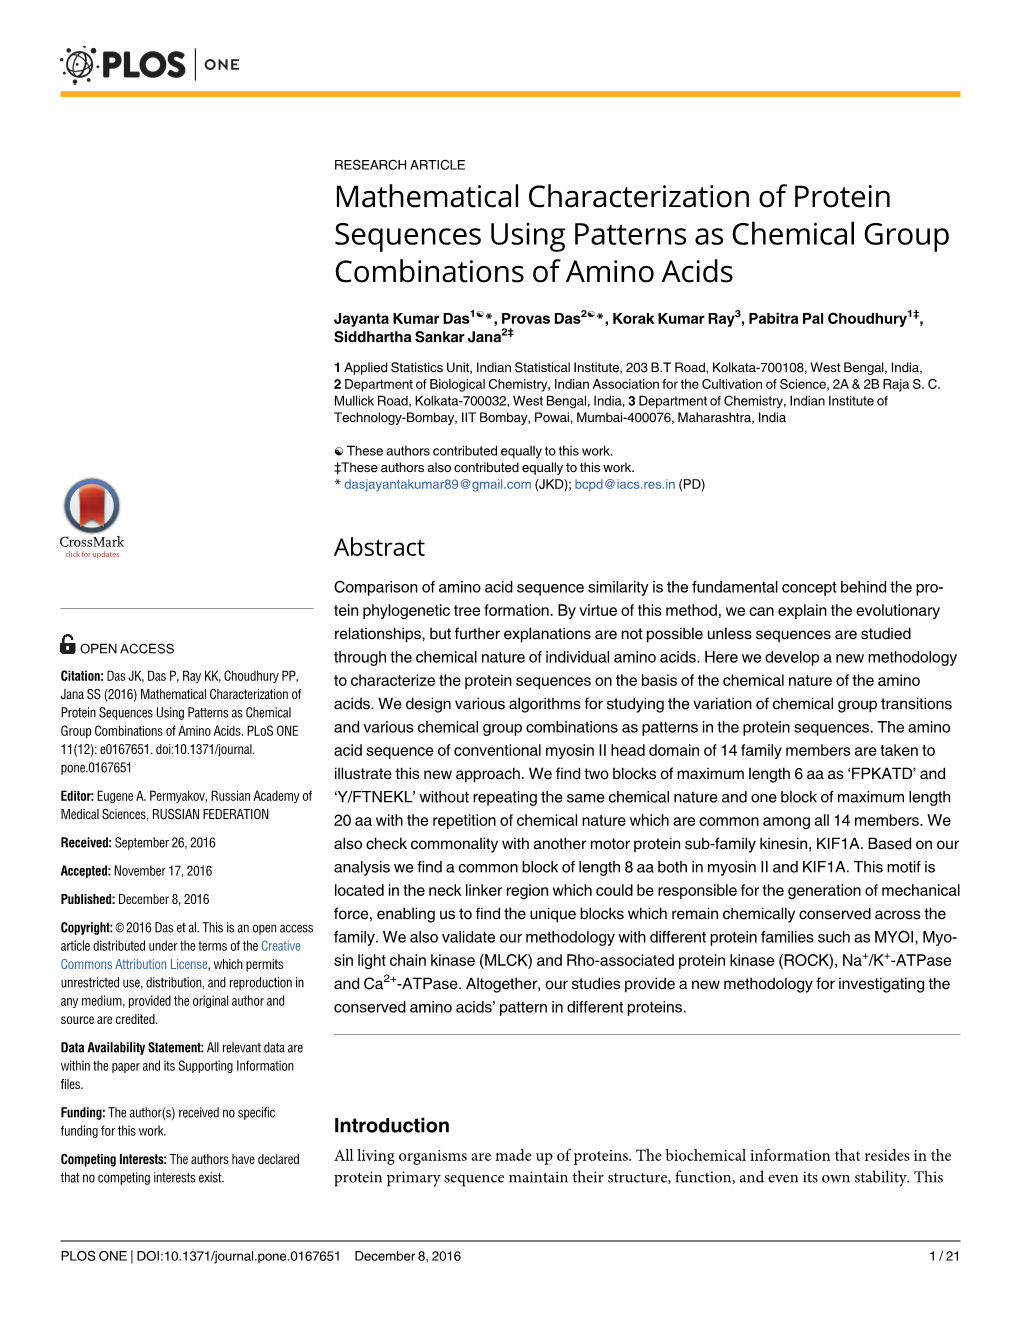 Mathematical Characterization of Protein Sequences Using Patterns As Chemical Group Combinations of Amino Acids